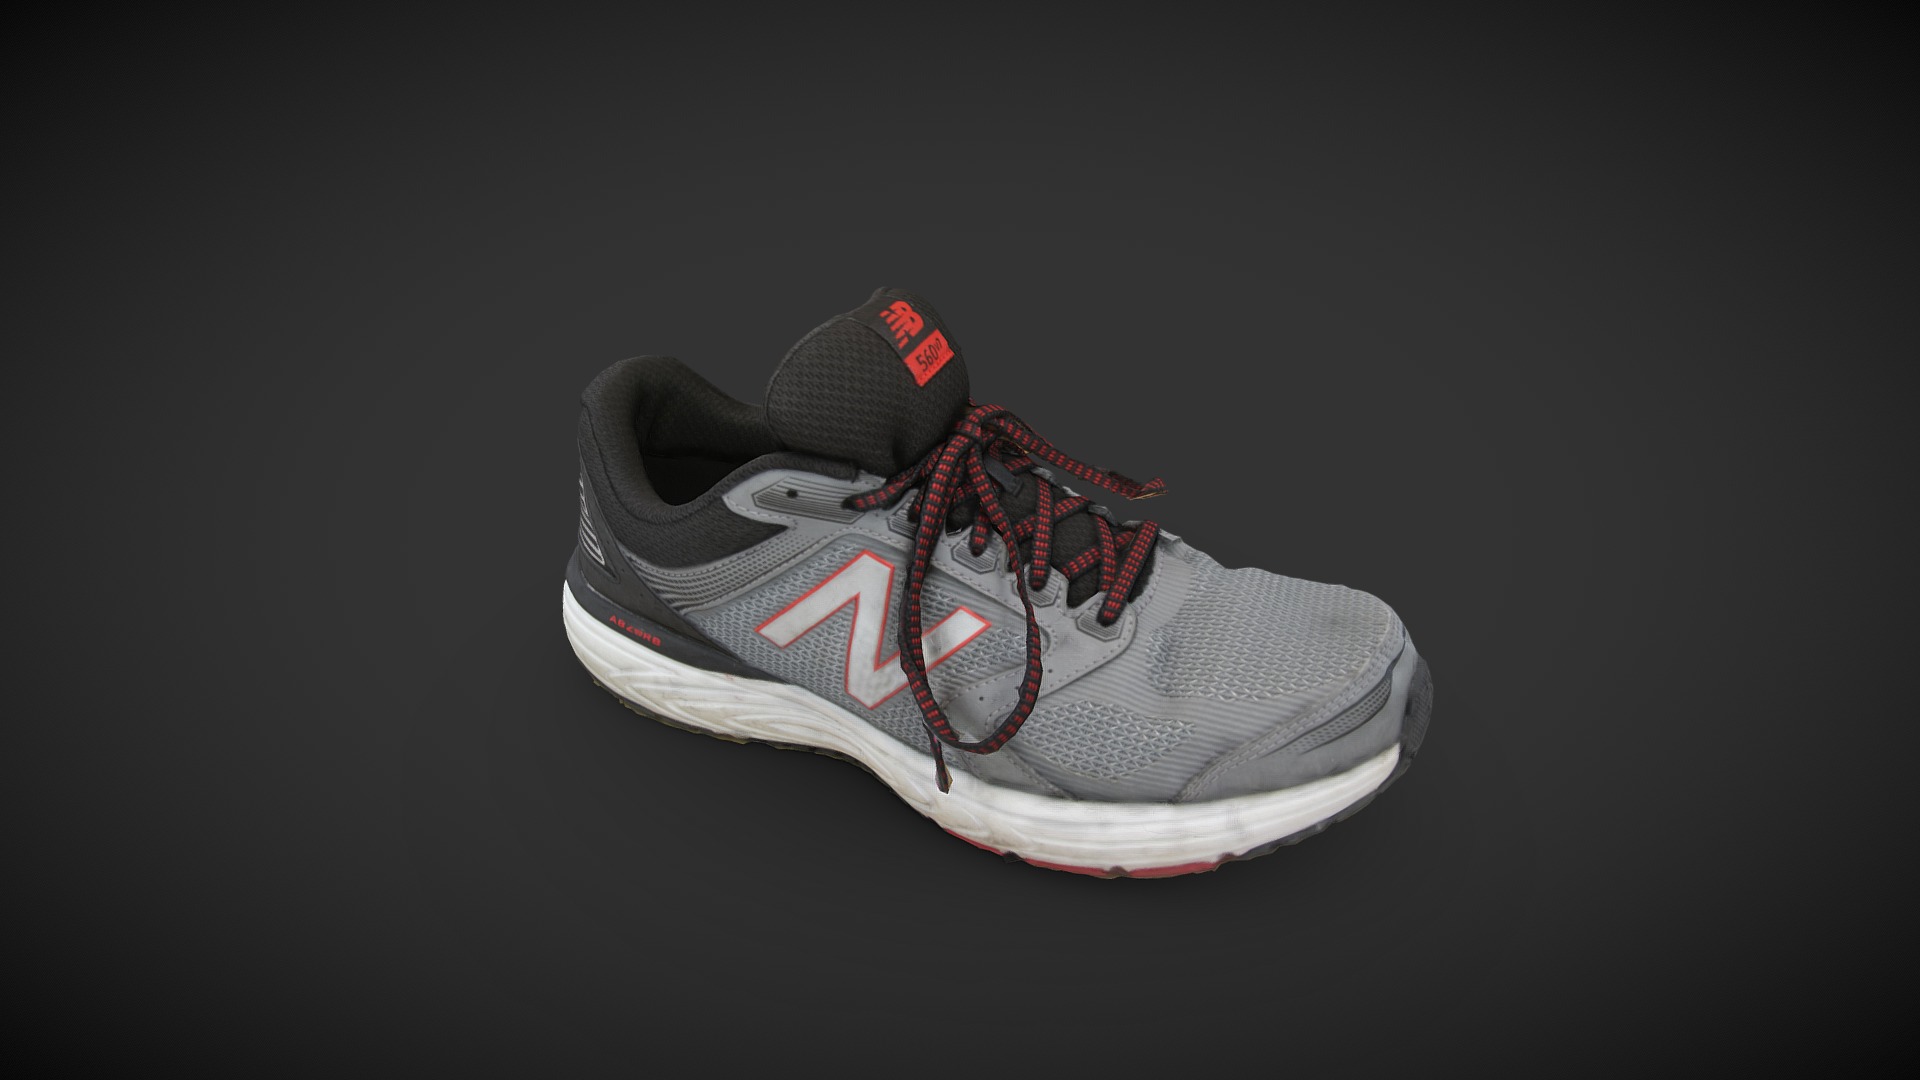 3D model New Balance Shoe - This is a 3D model of the New Balance Shoe. The 3D model is about a white and red shoe.